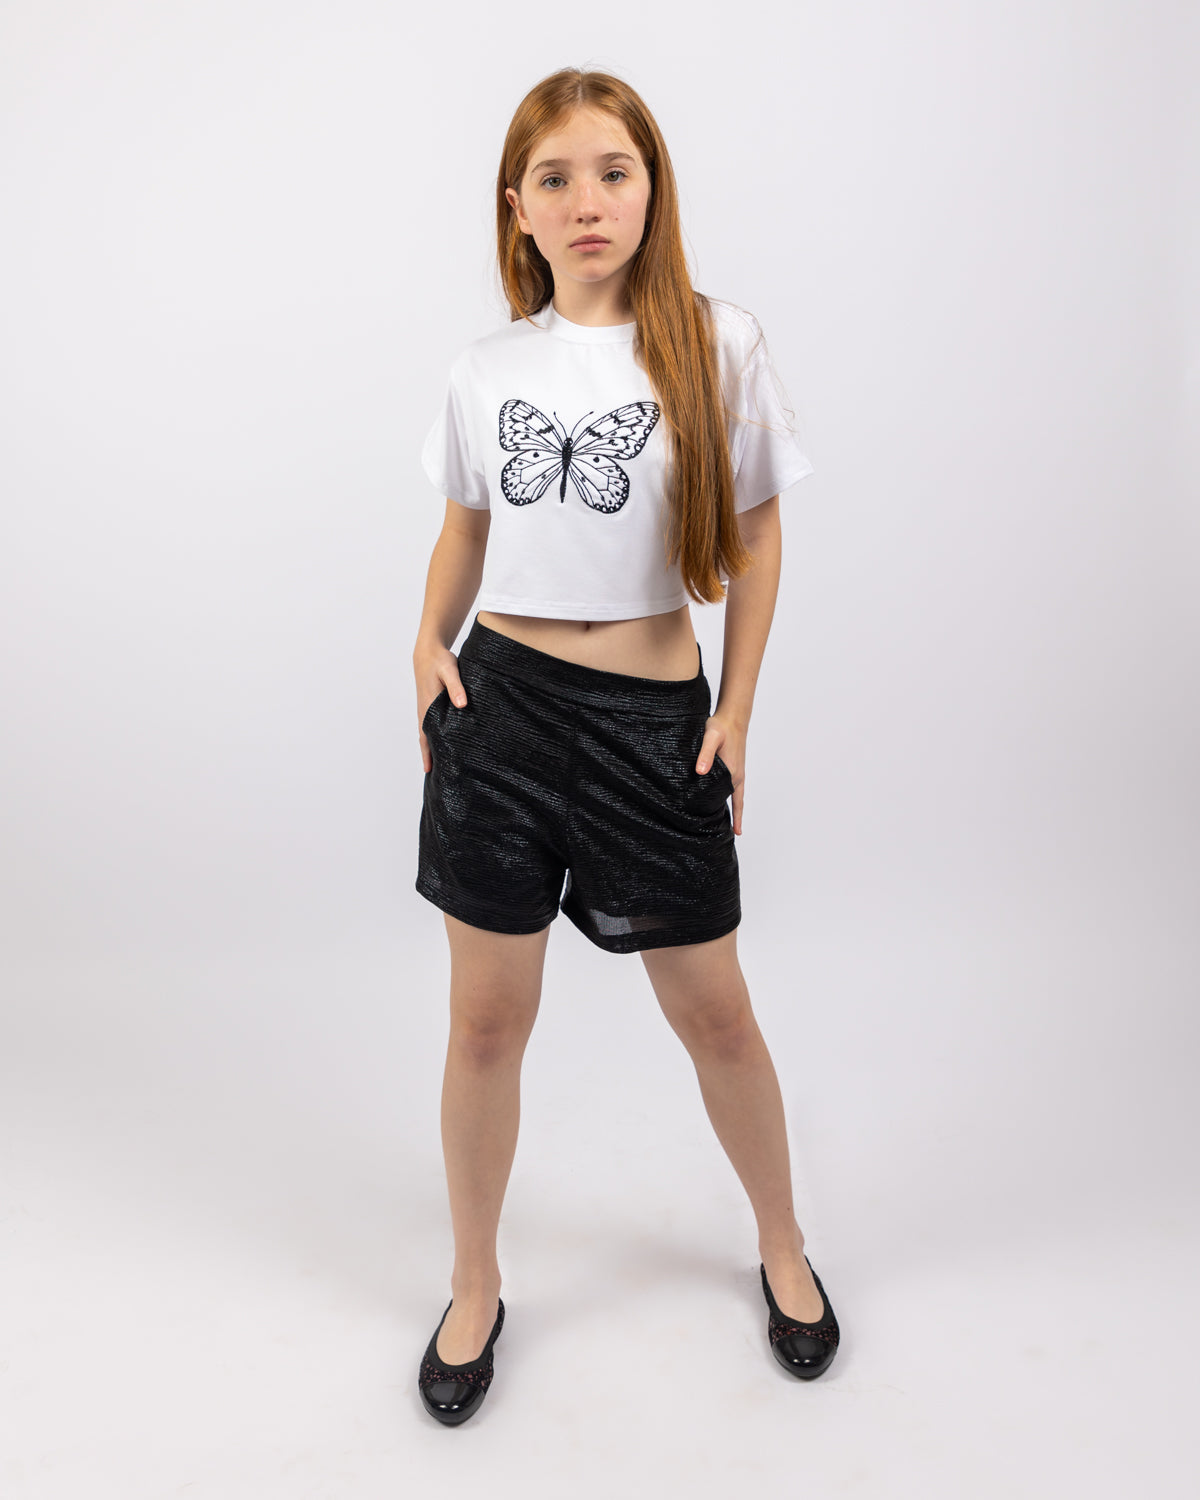 Butterfly Crop Top For Girls - White